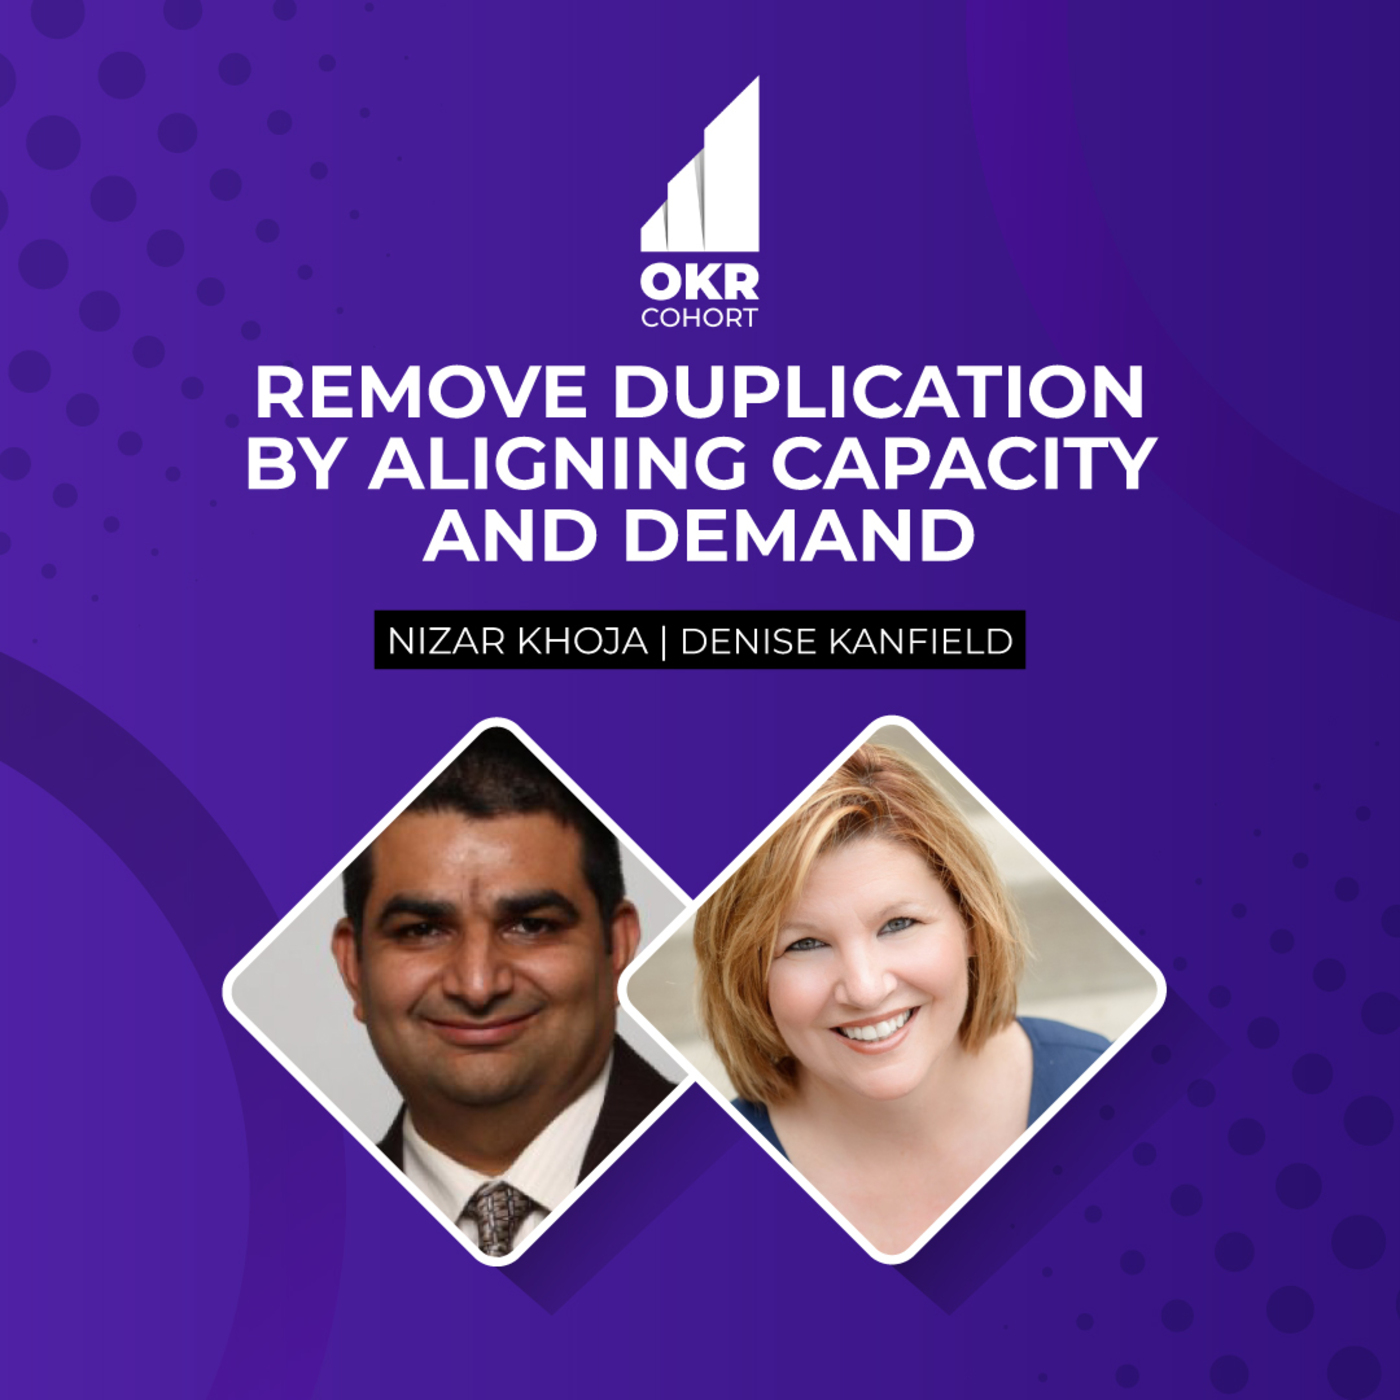 Remove Duplication by Aligning Capacity and Demand